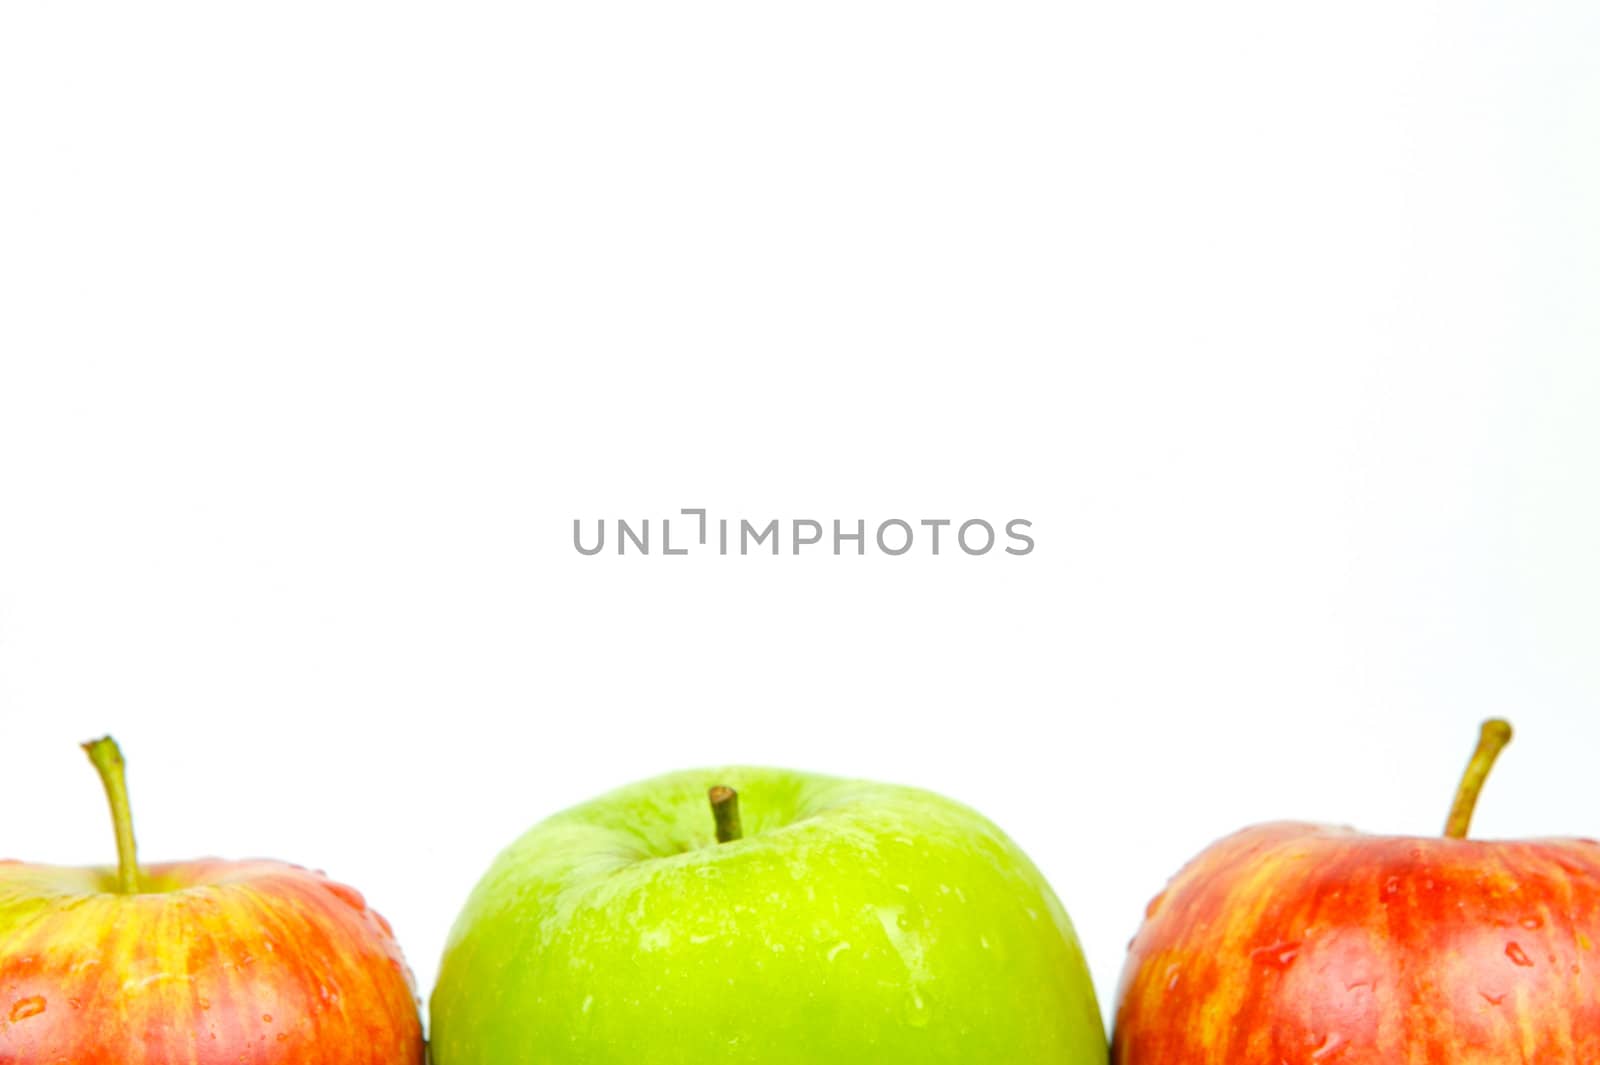 Red and green apples isolated against a white background